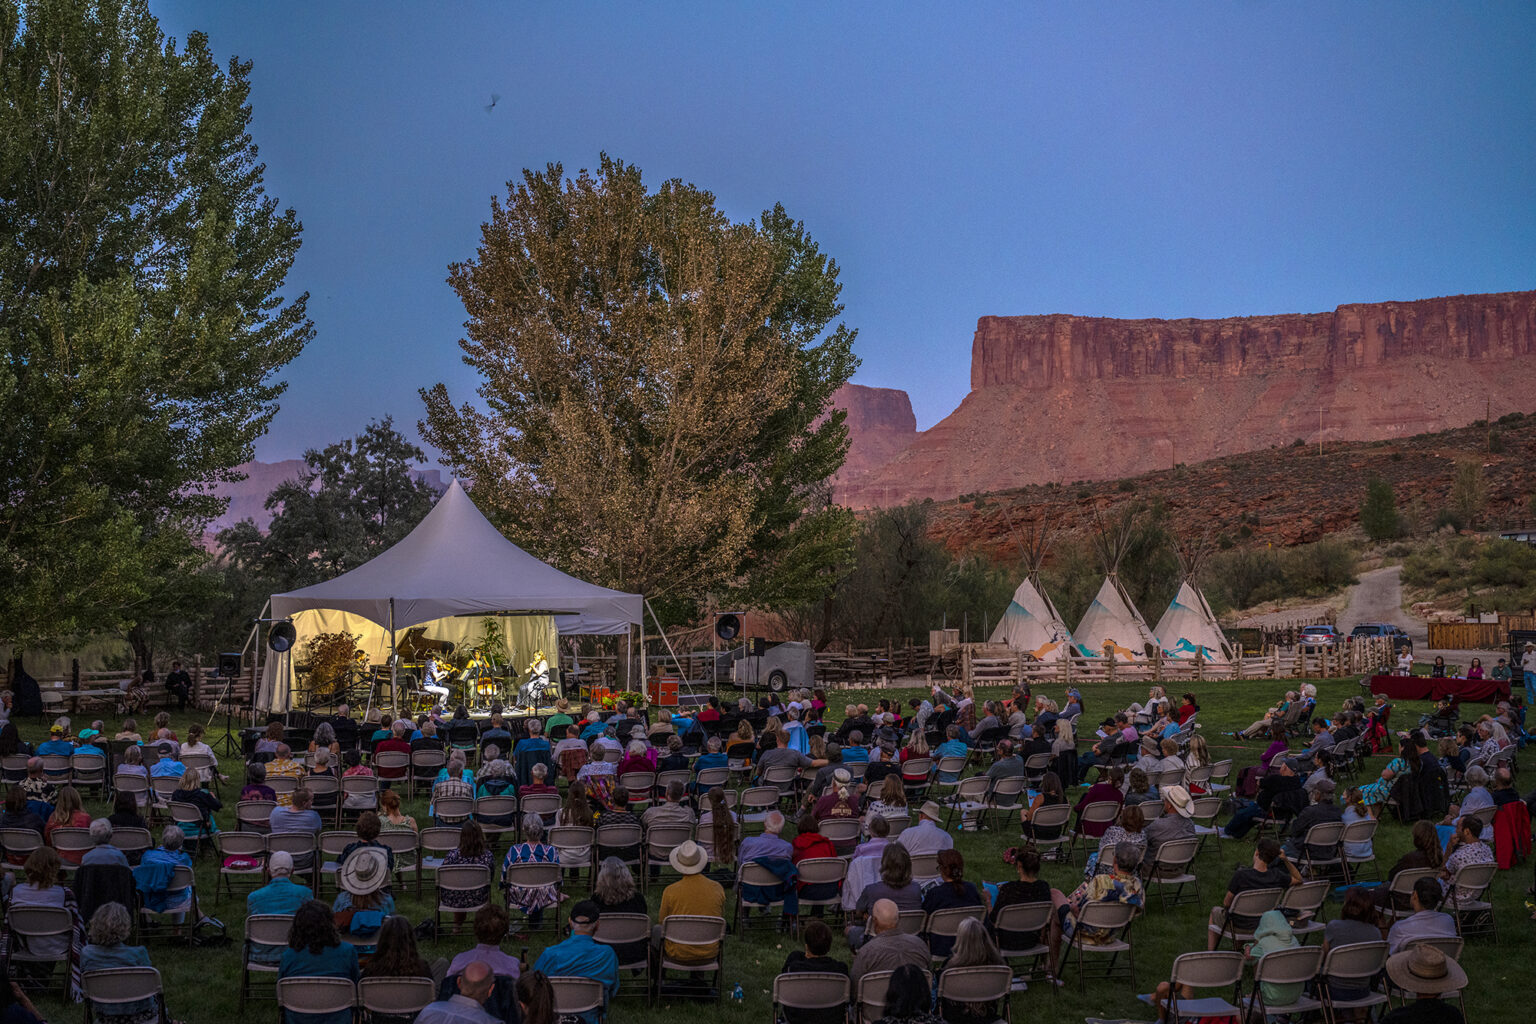 The Moab Music Festival Celebrates 30 Years - The Independent | News Events Opinion More